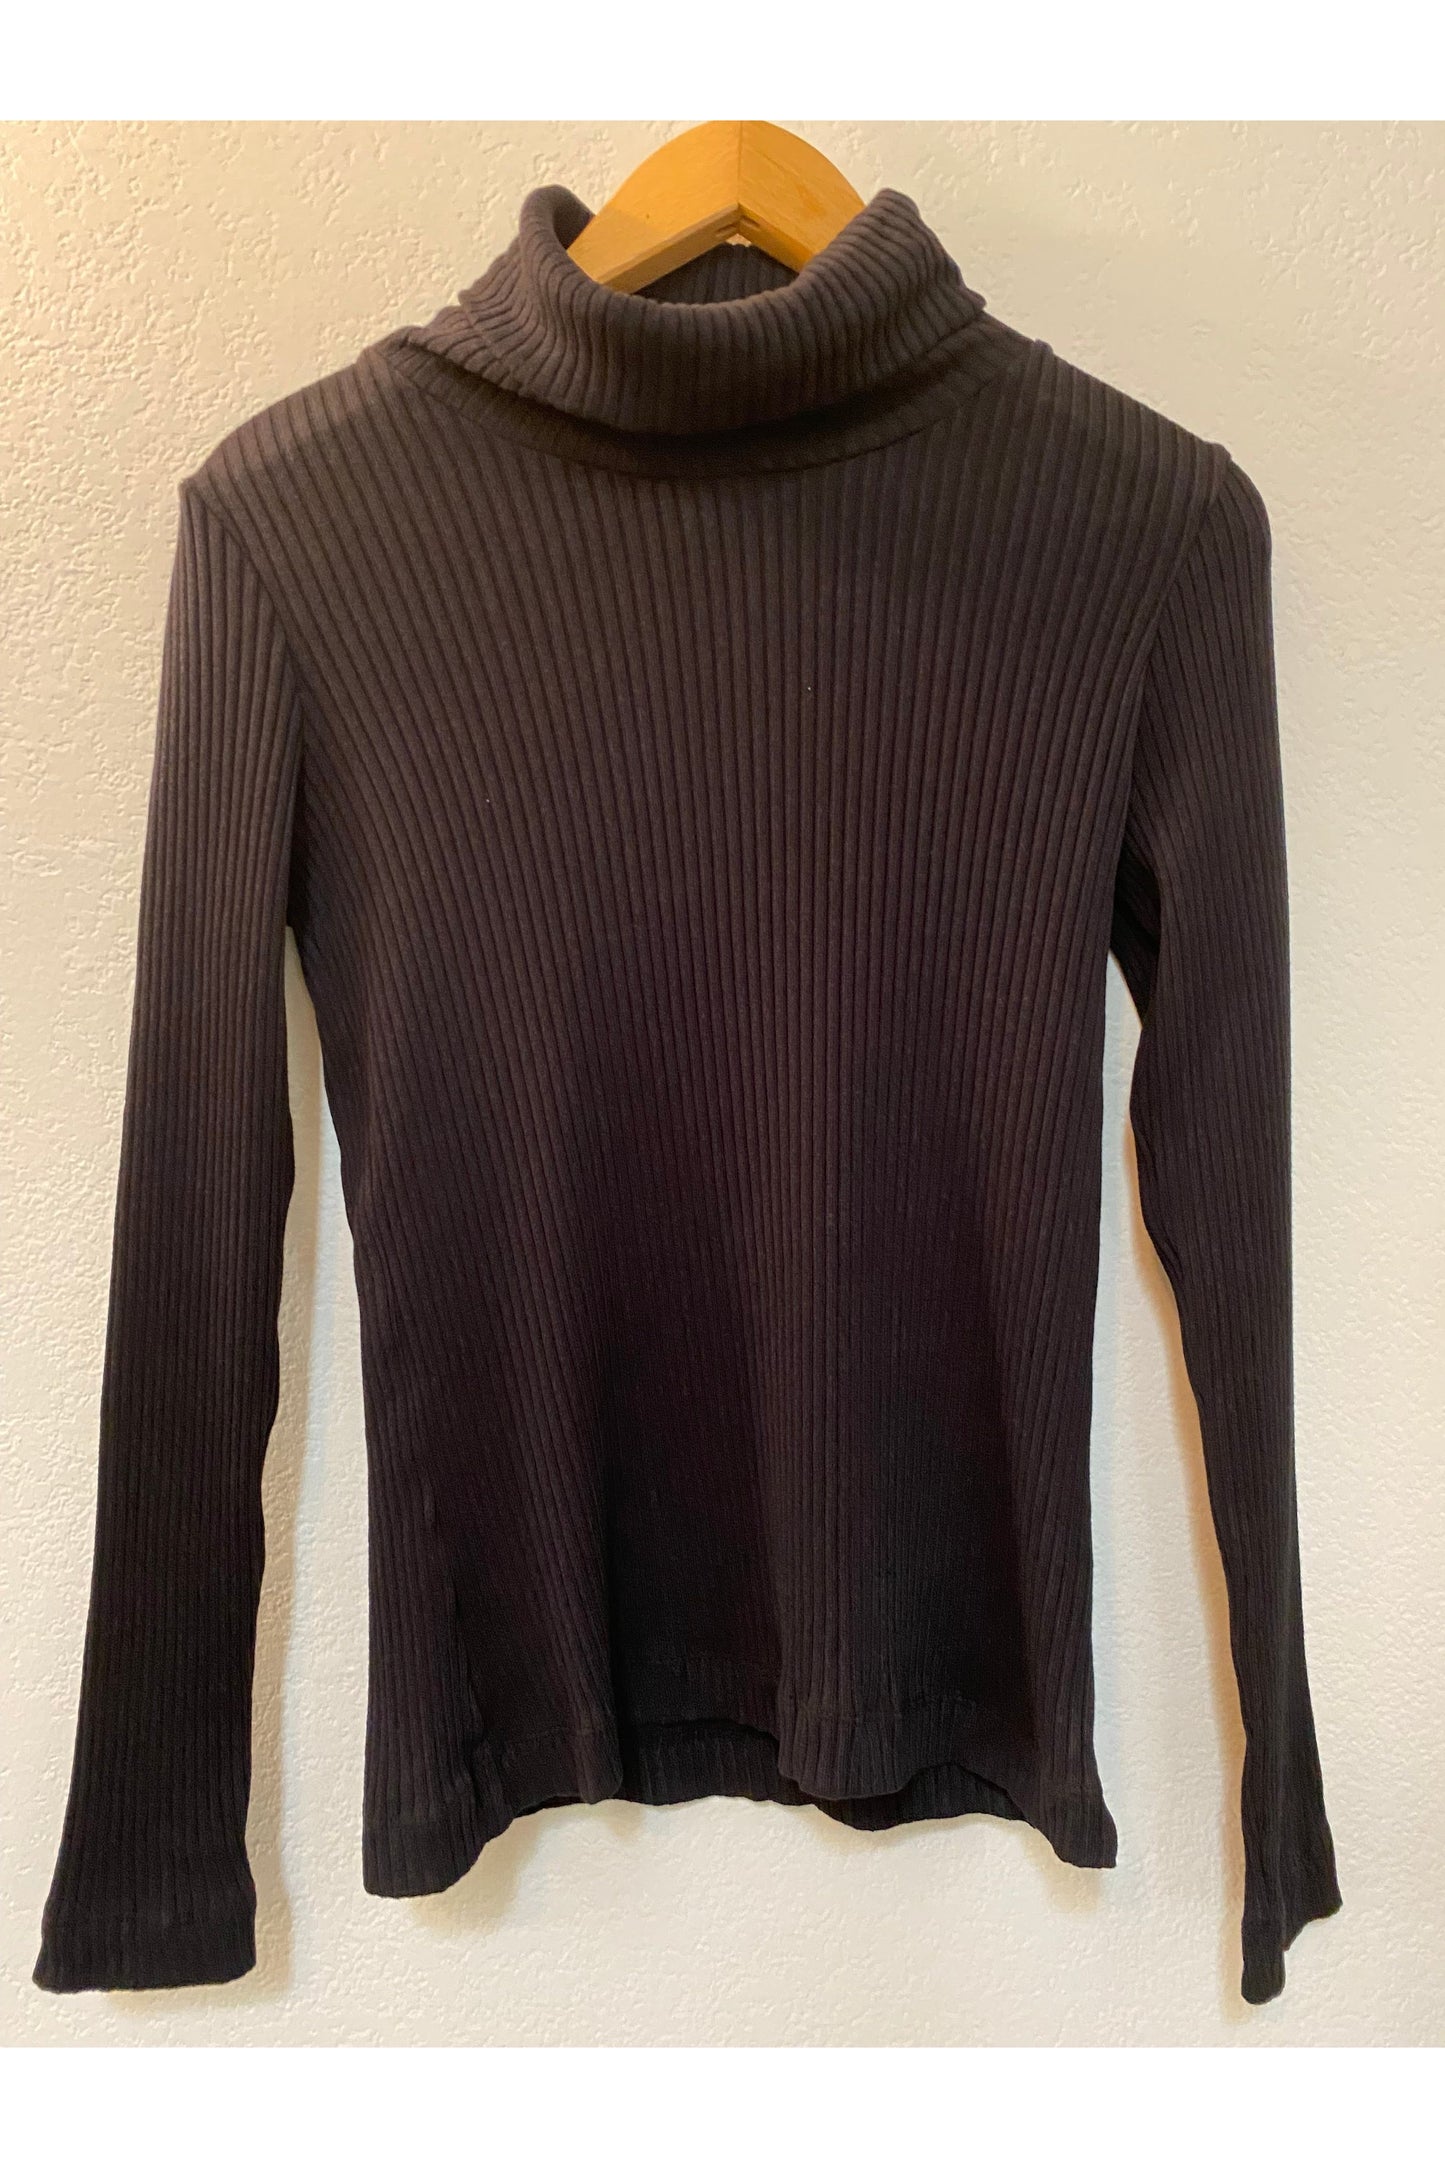 Prairie Cotton - Long Sleeve Ribbed Turtle Neck - Three Colors - 4607